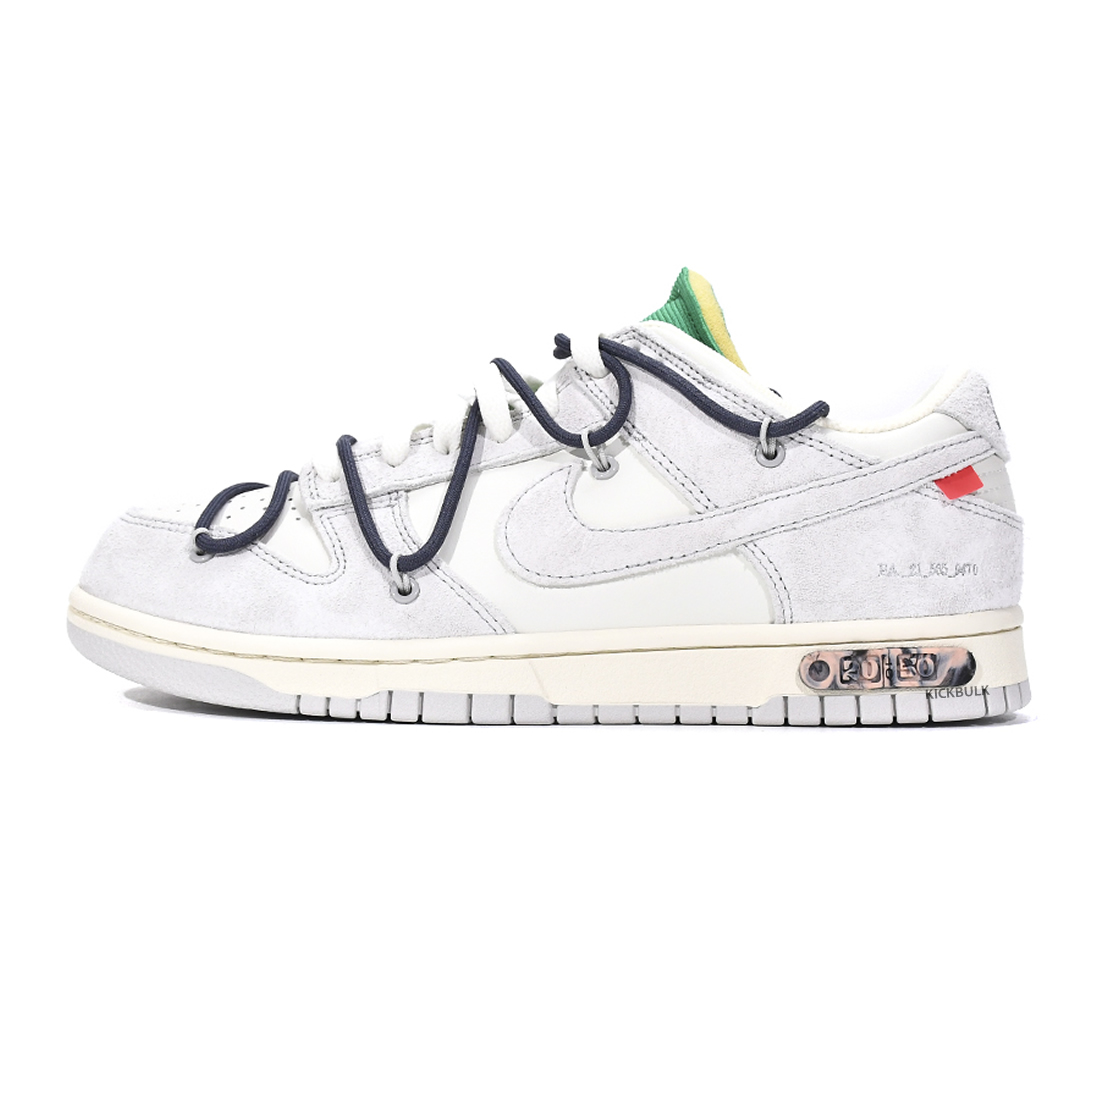 Off-White x Dunk Low Lot 04 of 50 –